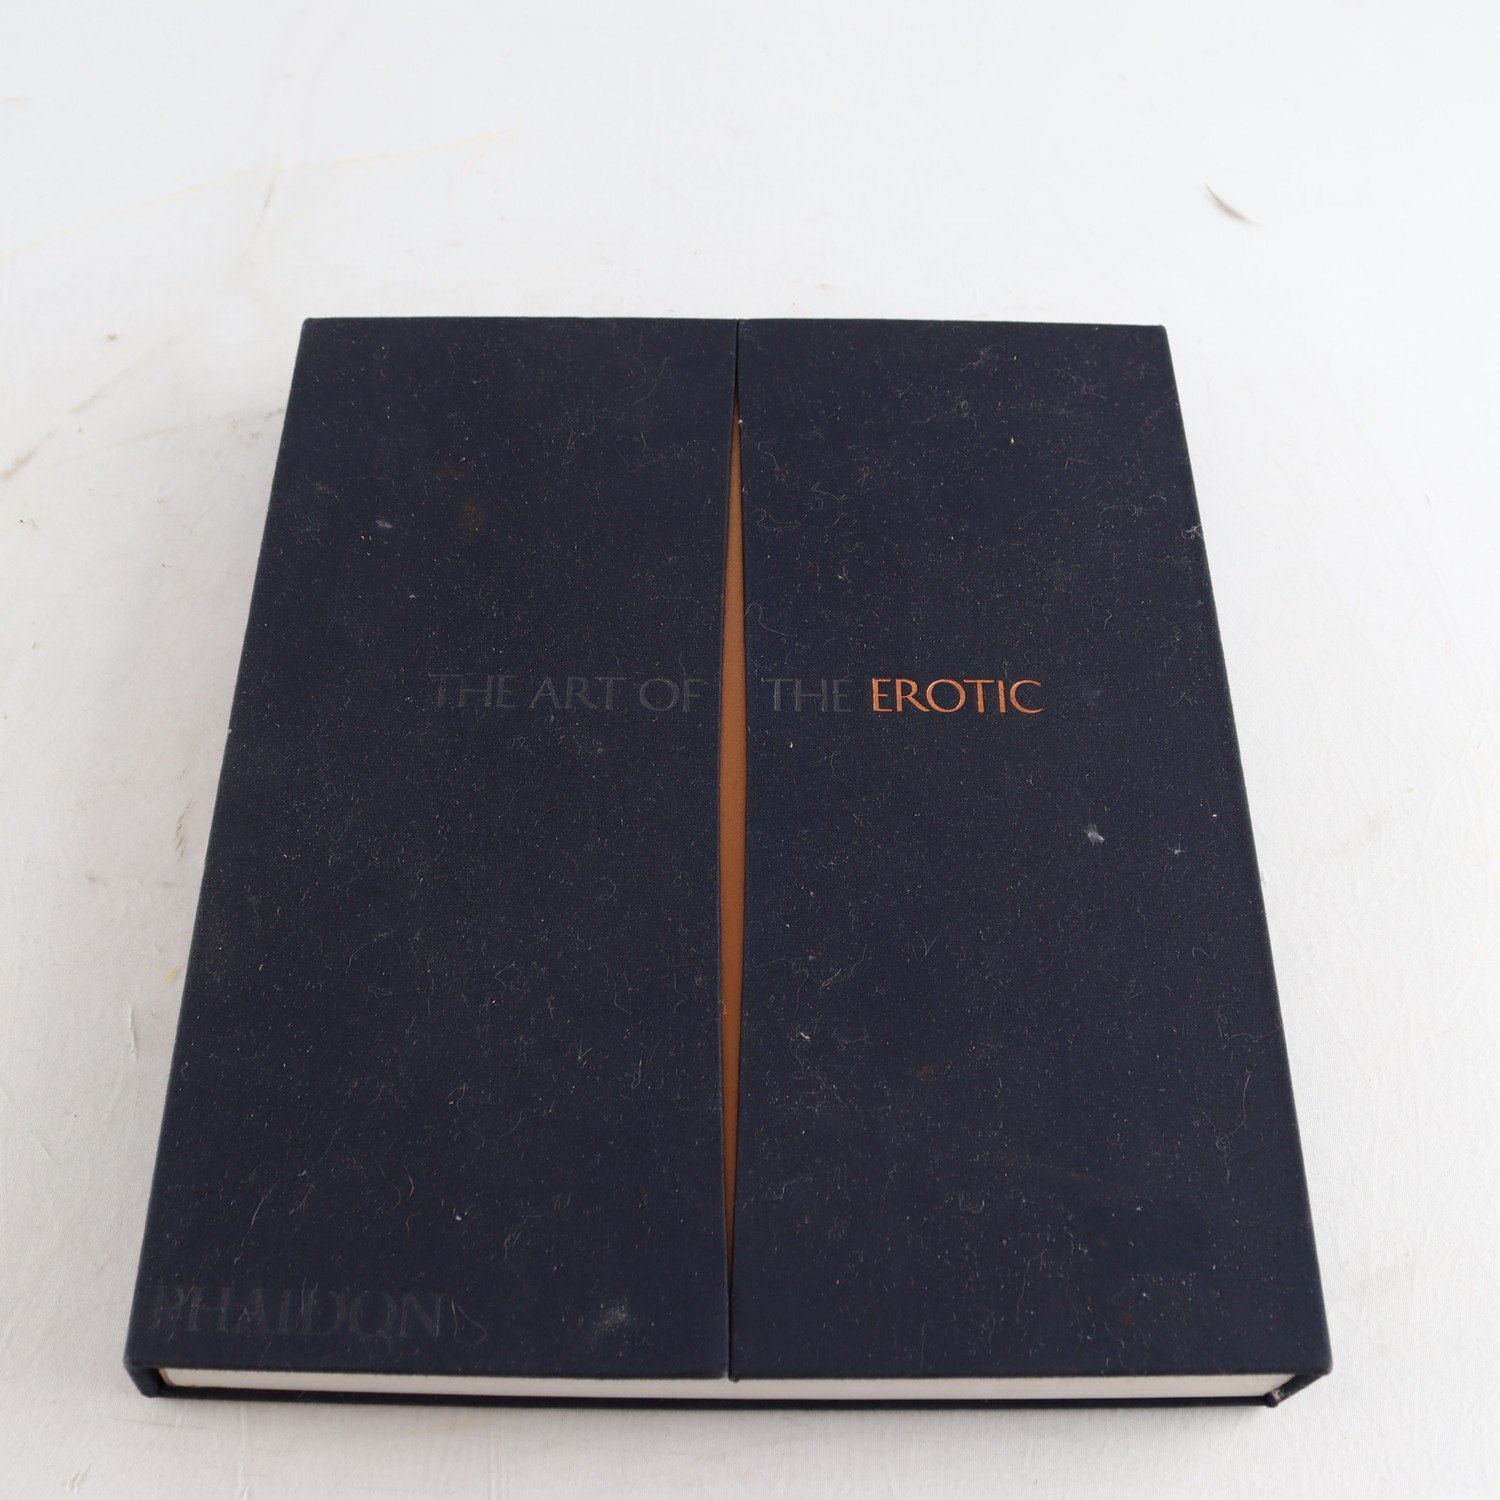 The art of the erotic,